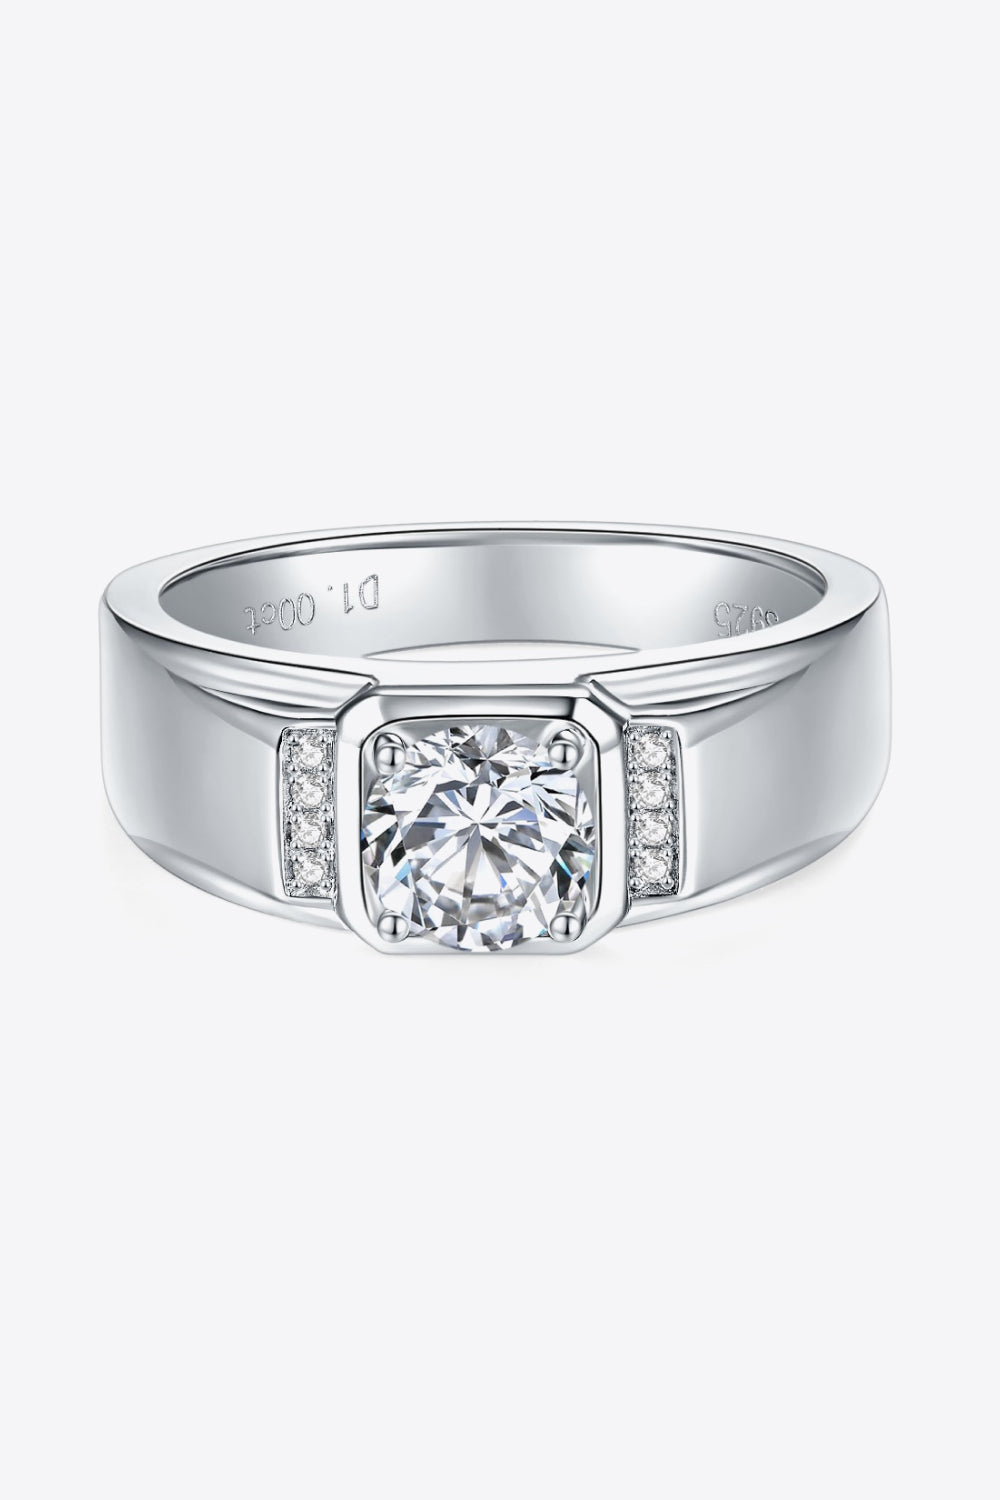 From The Heart 1 Carat Moissanite Ring